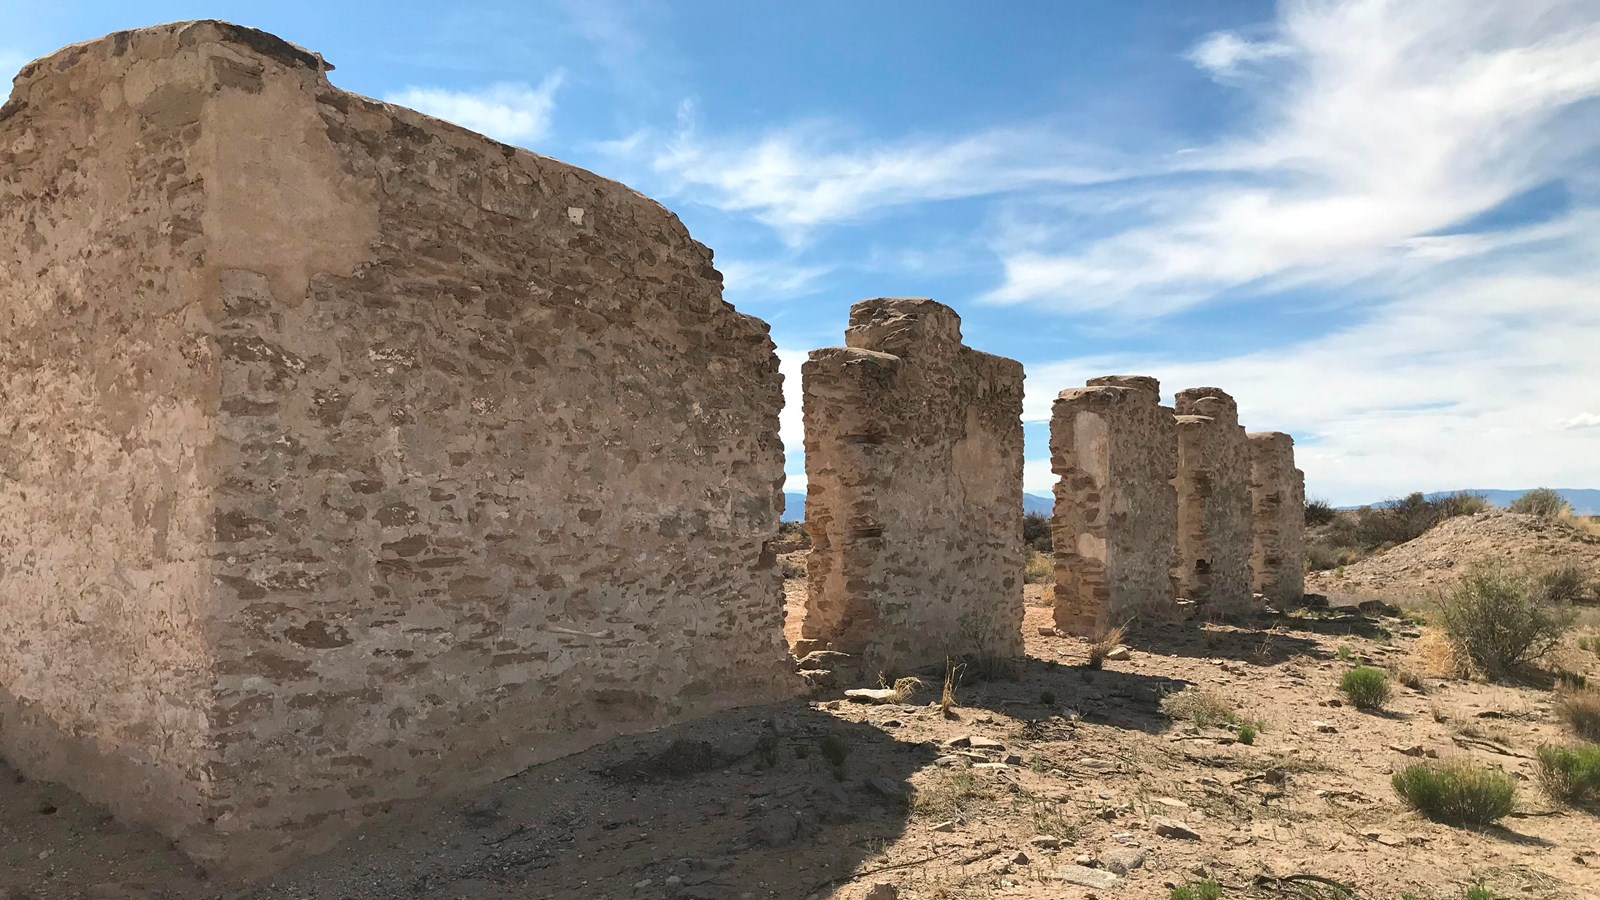 Adobe ruins of fort walls stand in a desert landscape.